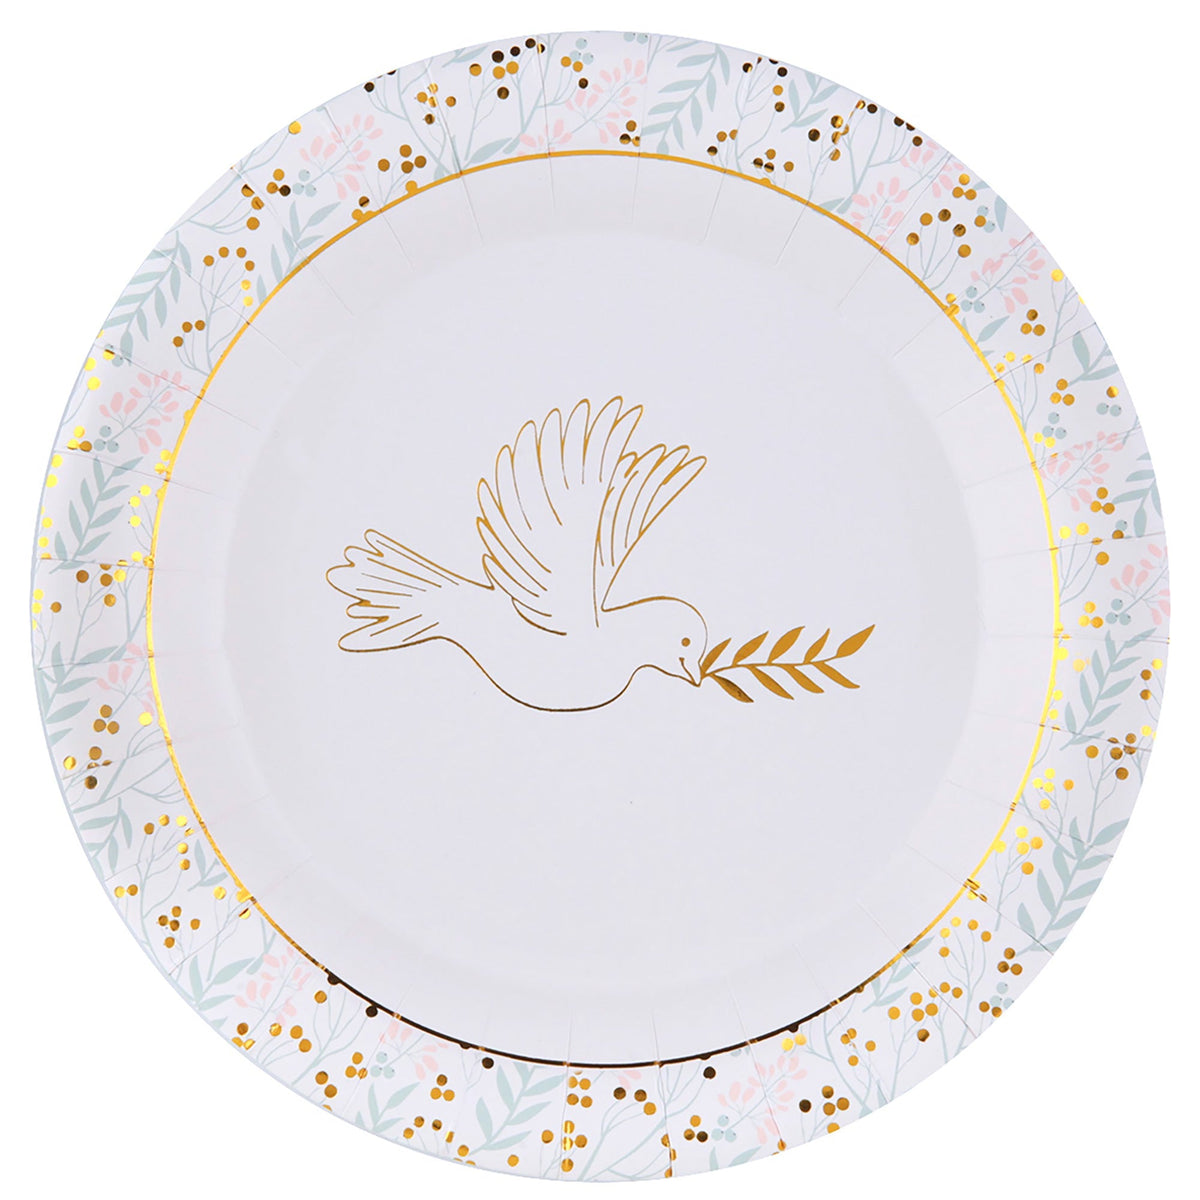 SANTEX Religious Communion Large Lunch Paper Plates, 9 Inches, 10 Count